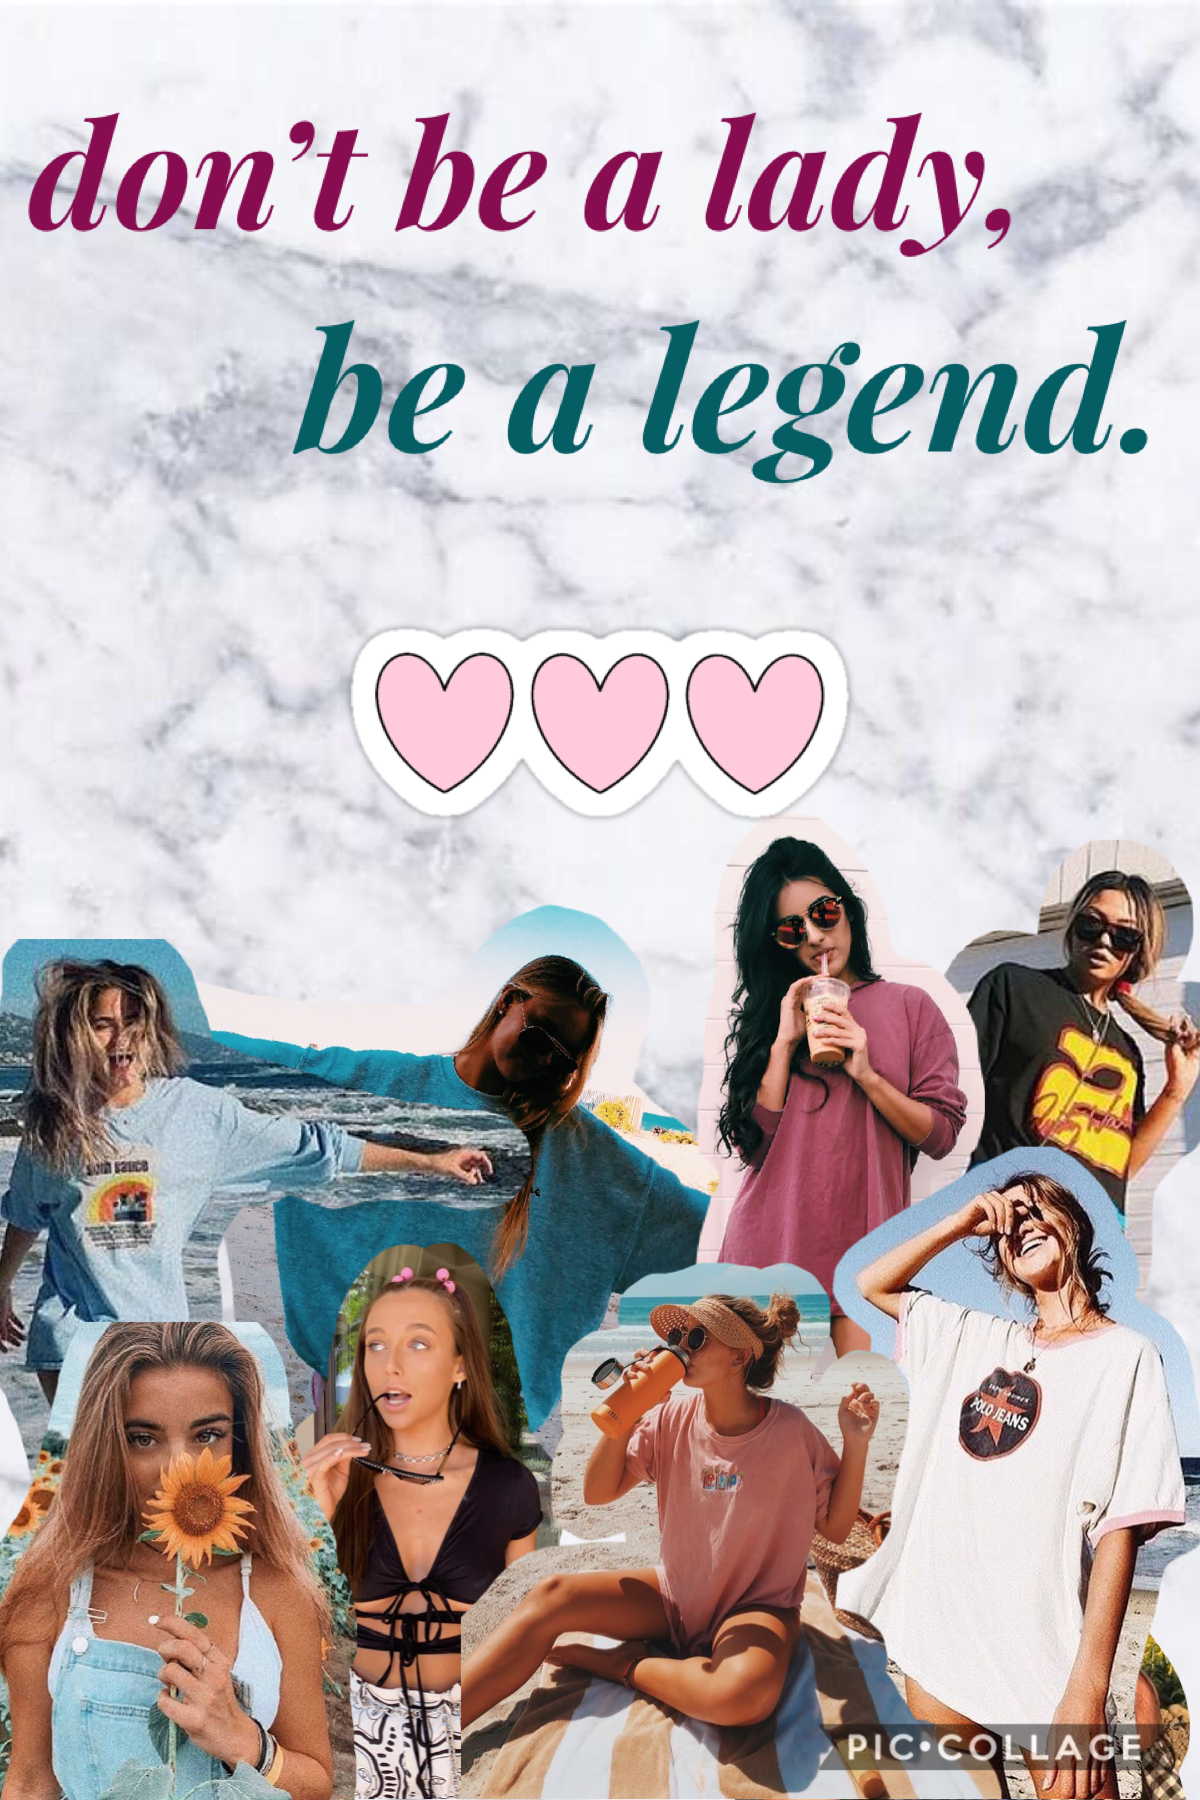 🌷tap🌷
be a legend :)
stay groovy...💞